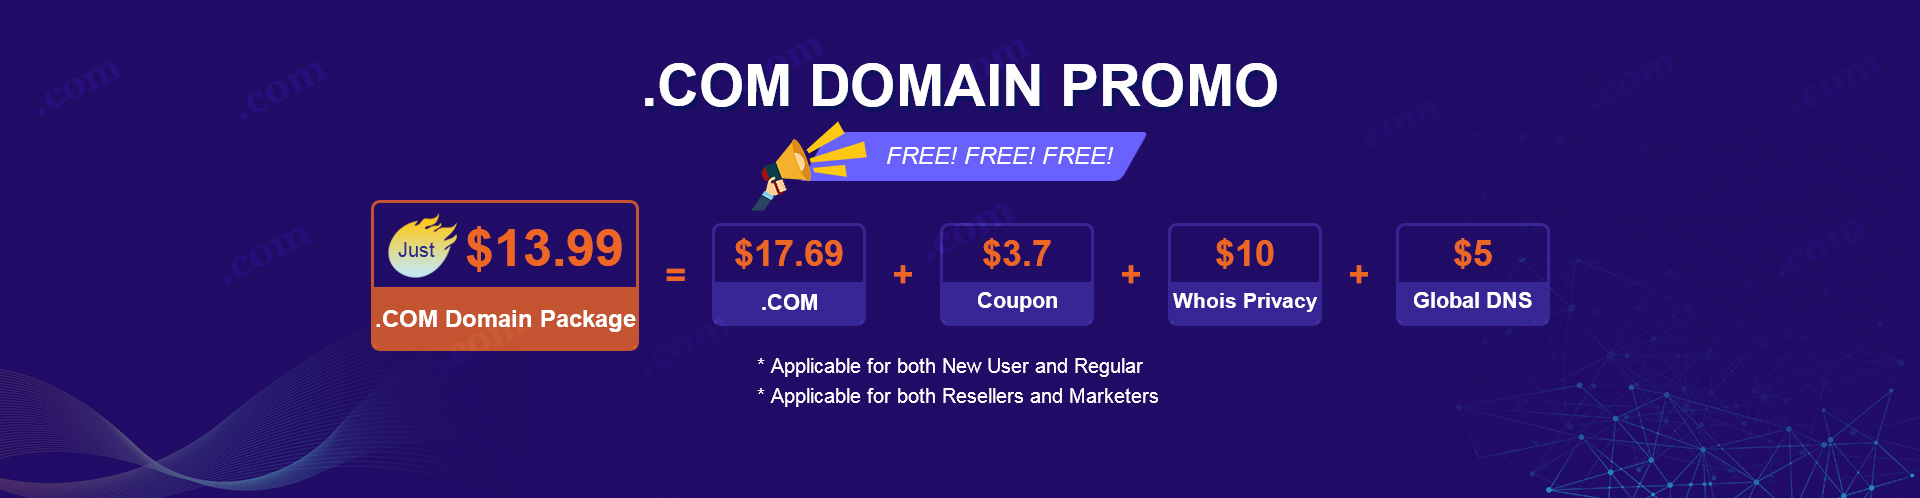 Best Site To Buy .com Domain